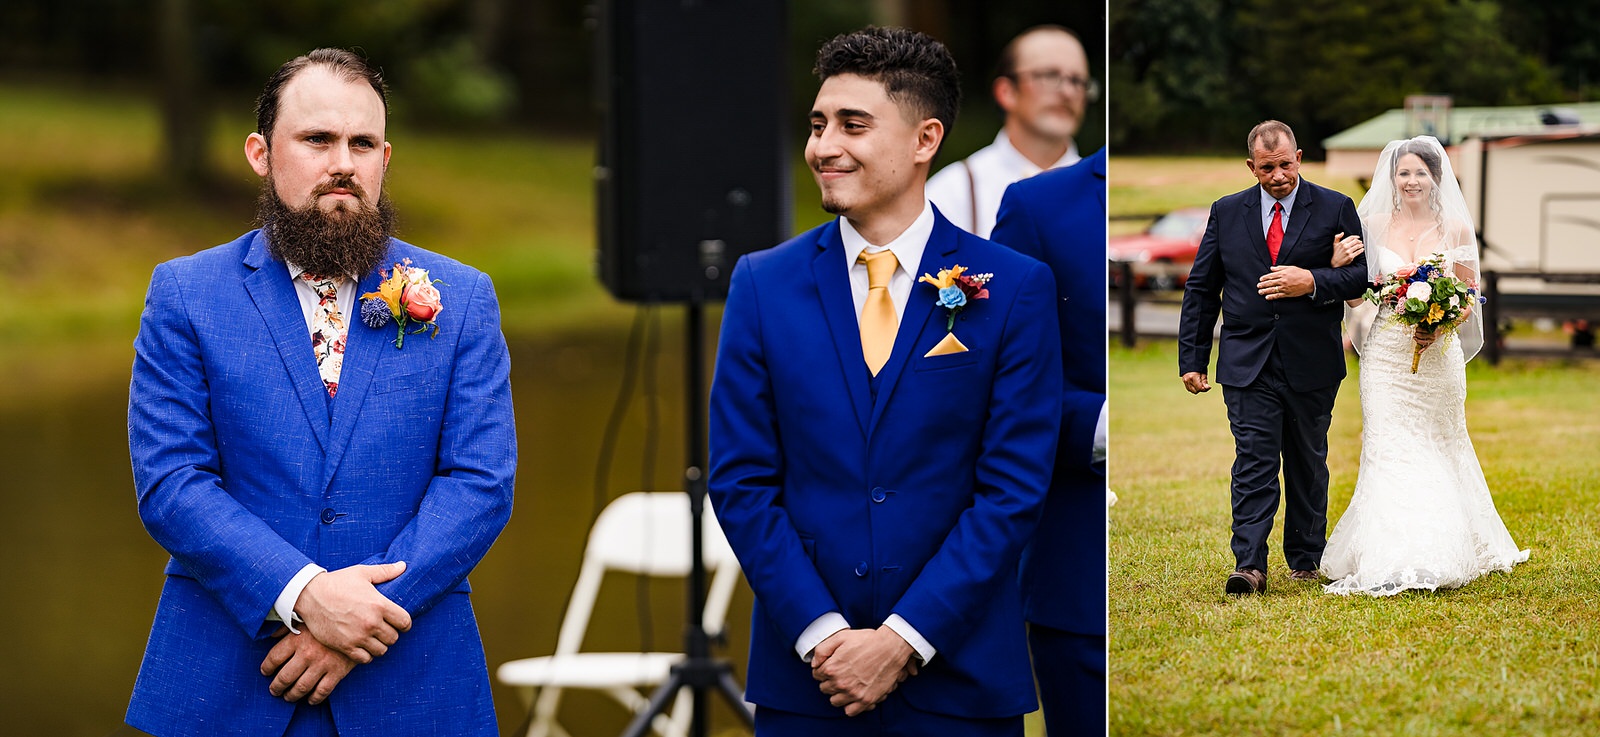 Best man looks over at groom's reaction to bride walking down the aisle at this farm wedding